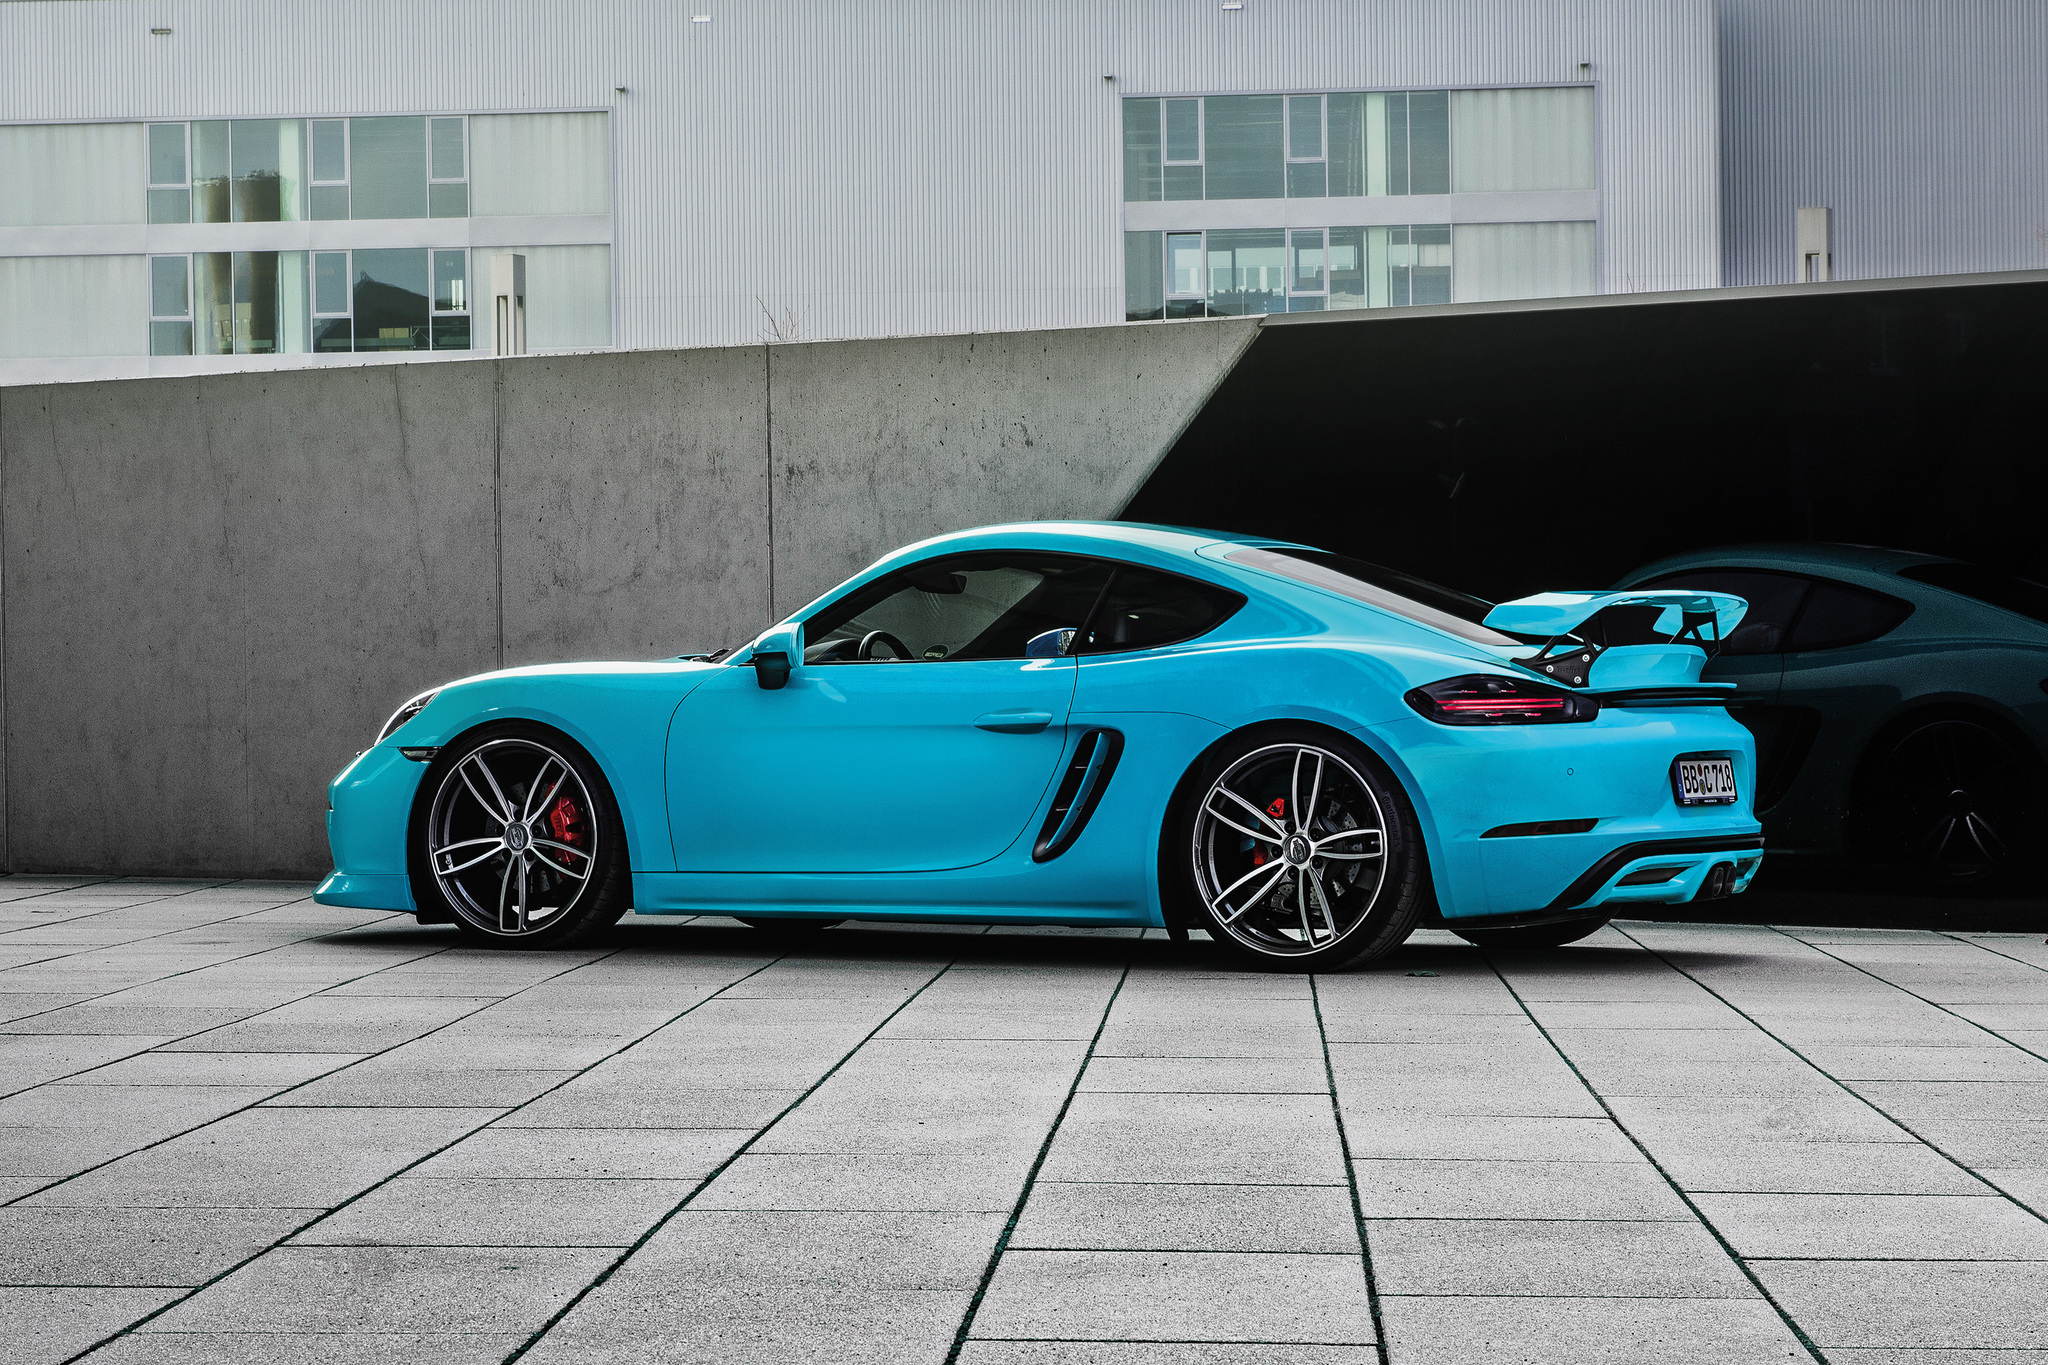 images-products-1-1839-233006895-TECHART_718Cayman_ext_03.jpg